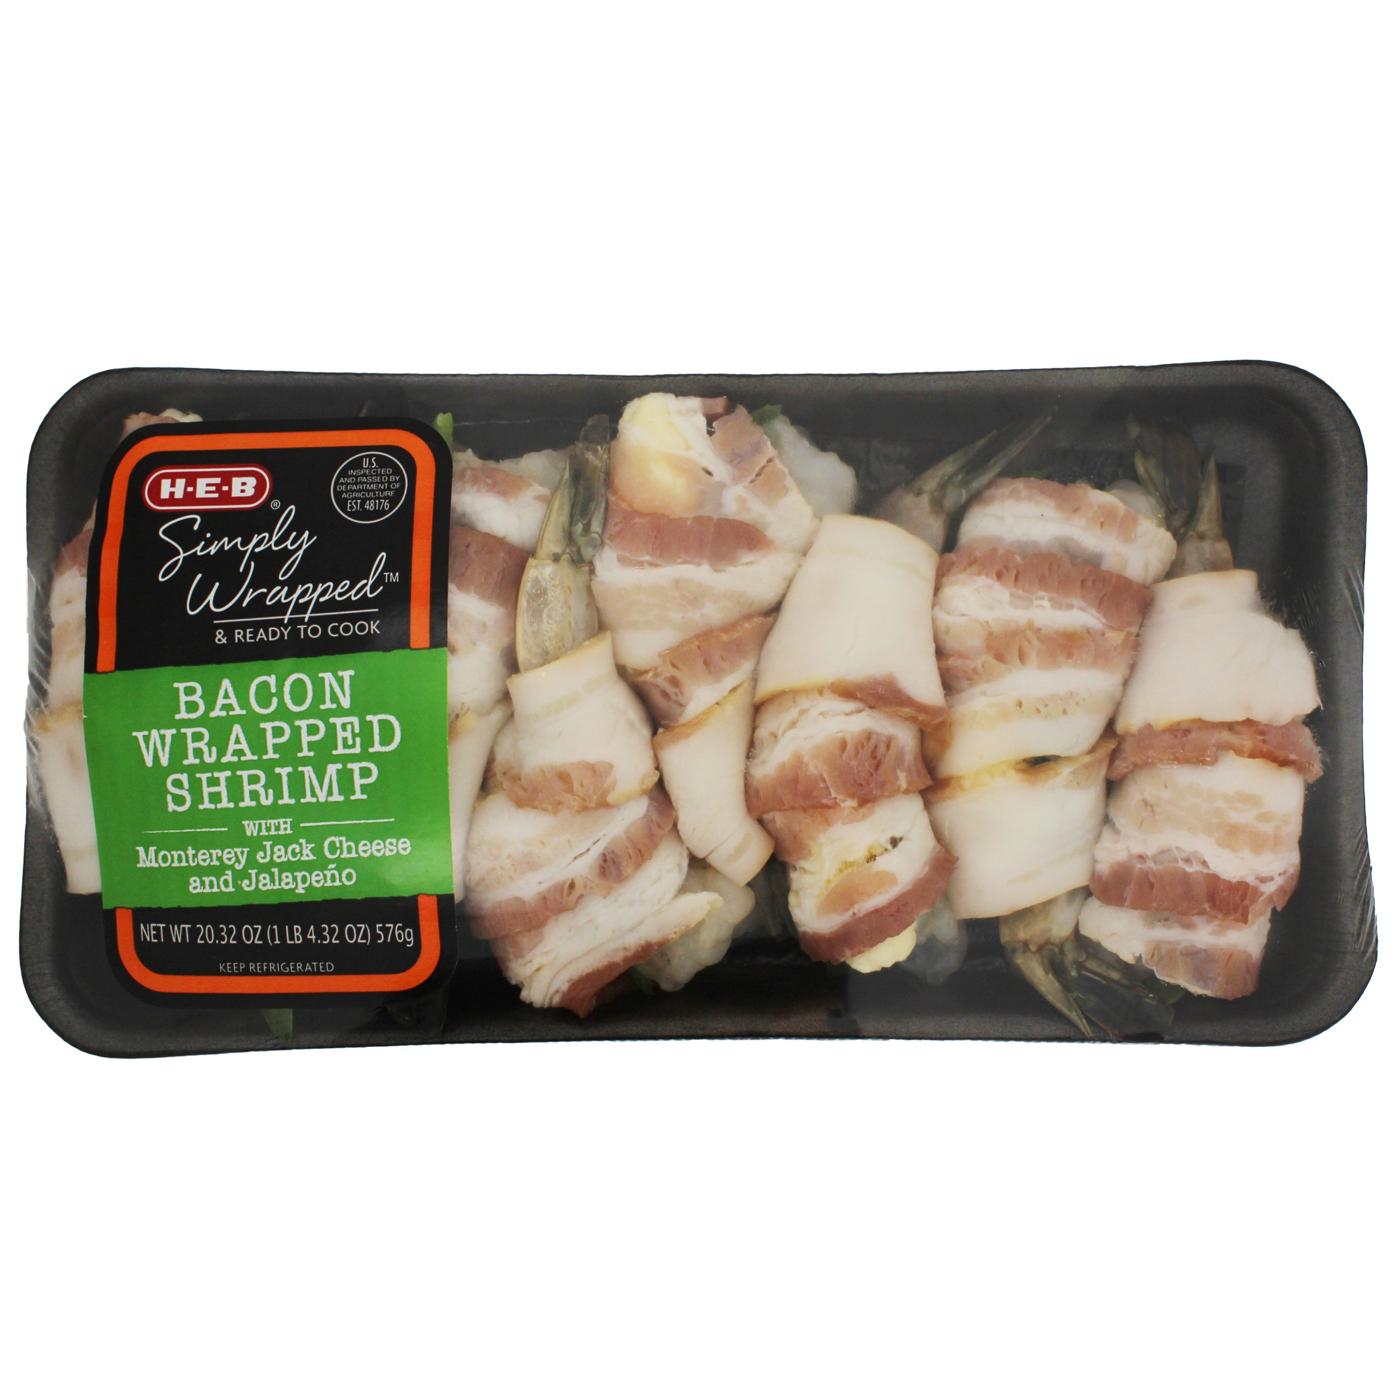 H-E-B Simply Wrapped Shrimp Monterey Jack Cheese Jalapeno Poppers; image 1 of 2